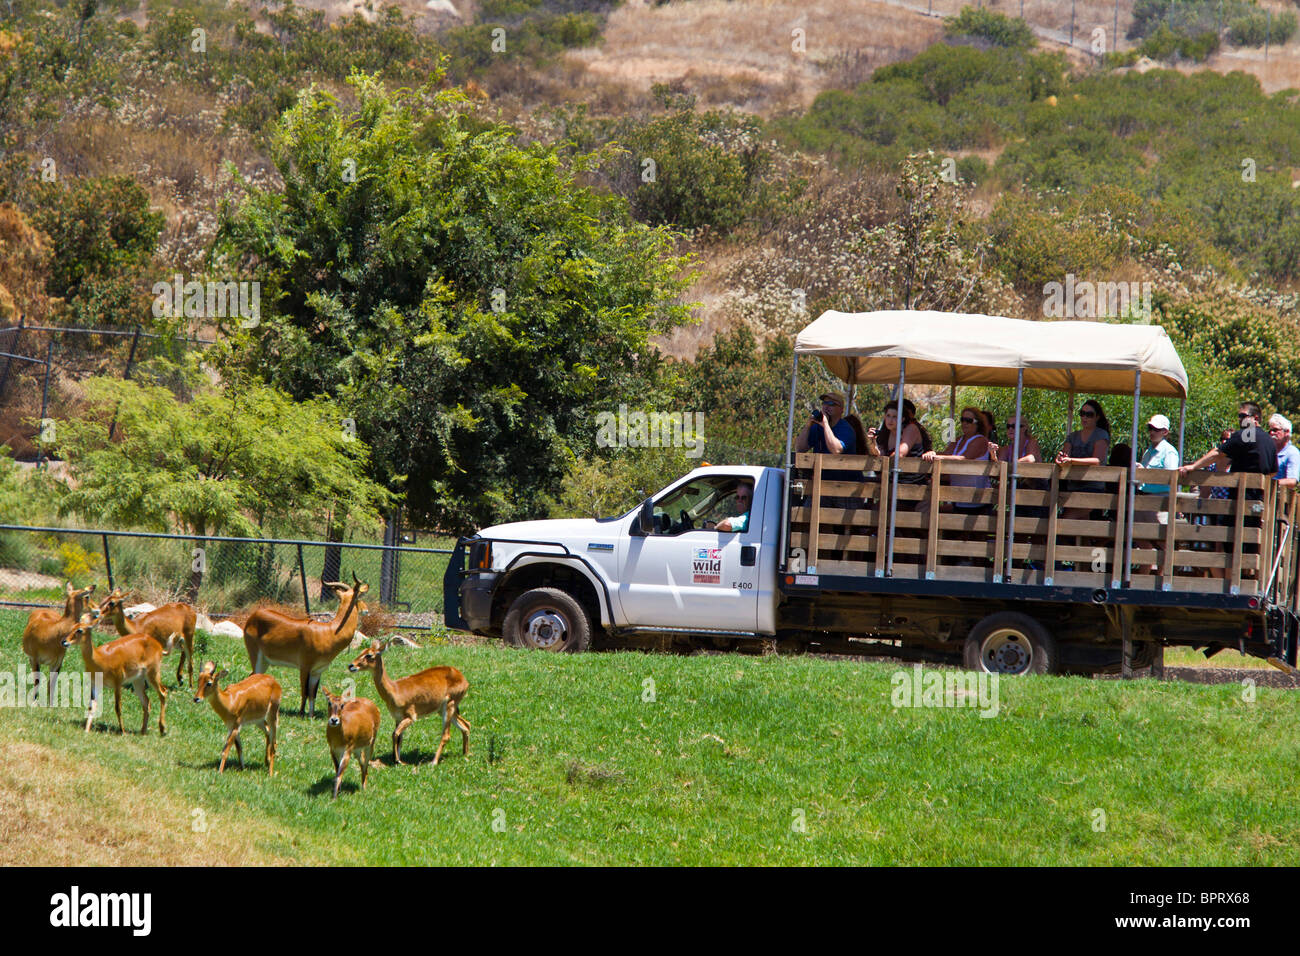 Visitors watch animals from an open truck, San Diego Zoo Safari Park,  Escondido, California, United States of America Stock Photo - Alamy